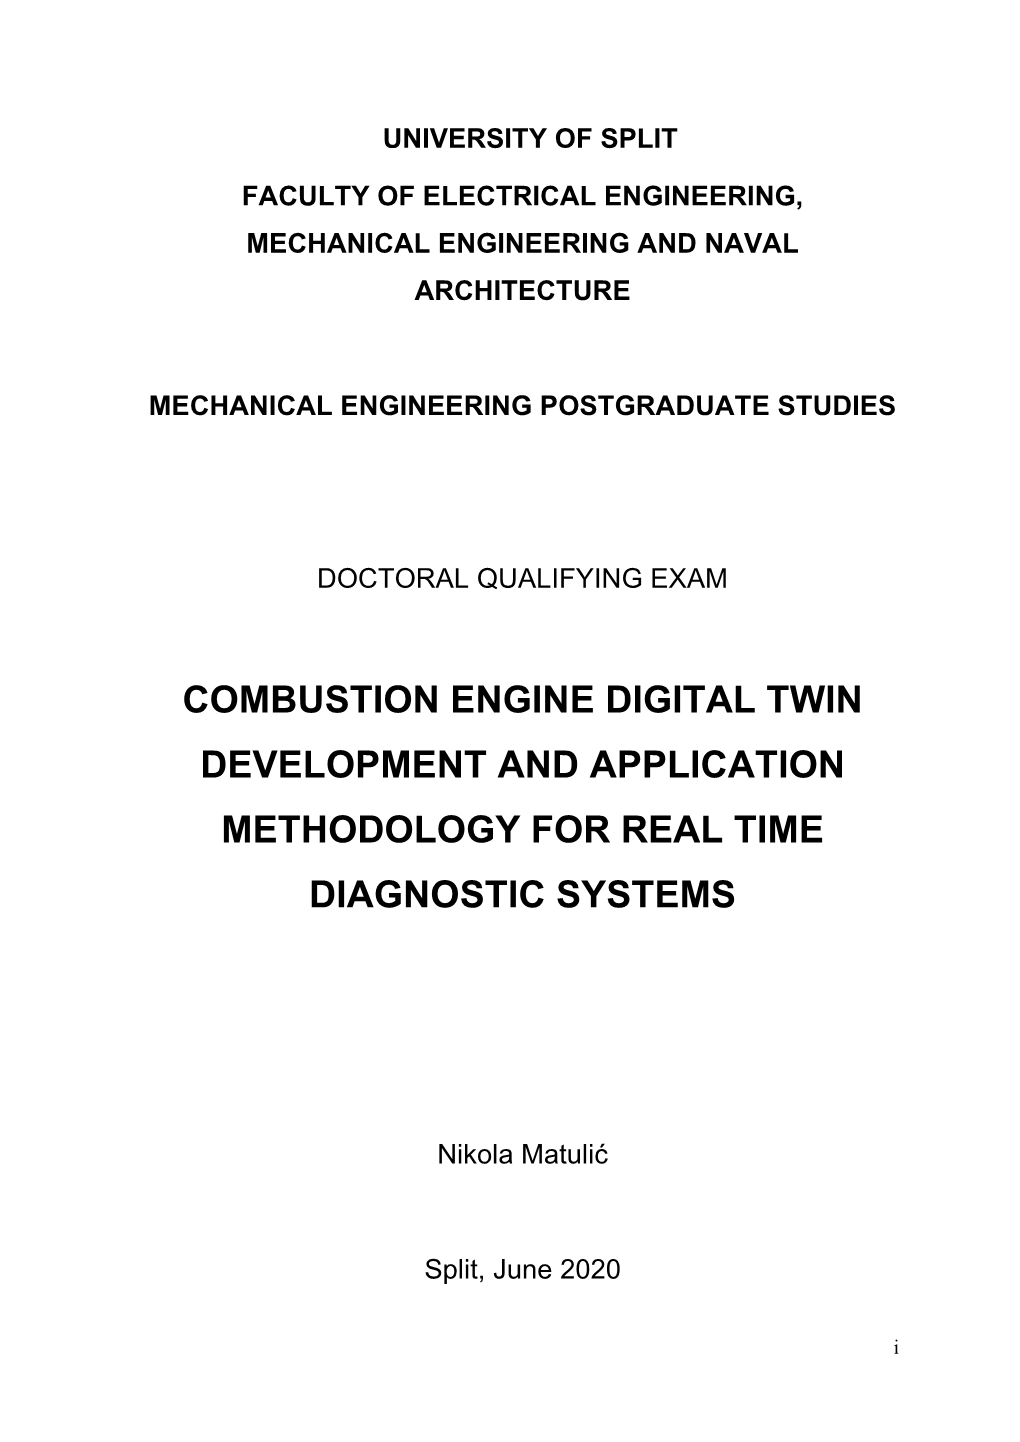 Combustion Engine Digital Twin Development and Application Methodology for Real Time Diagnostic Systems